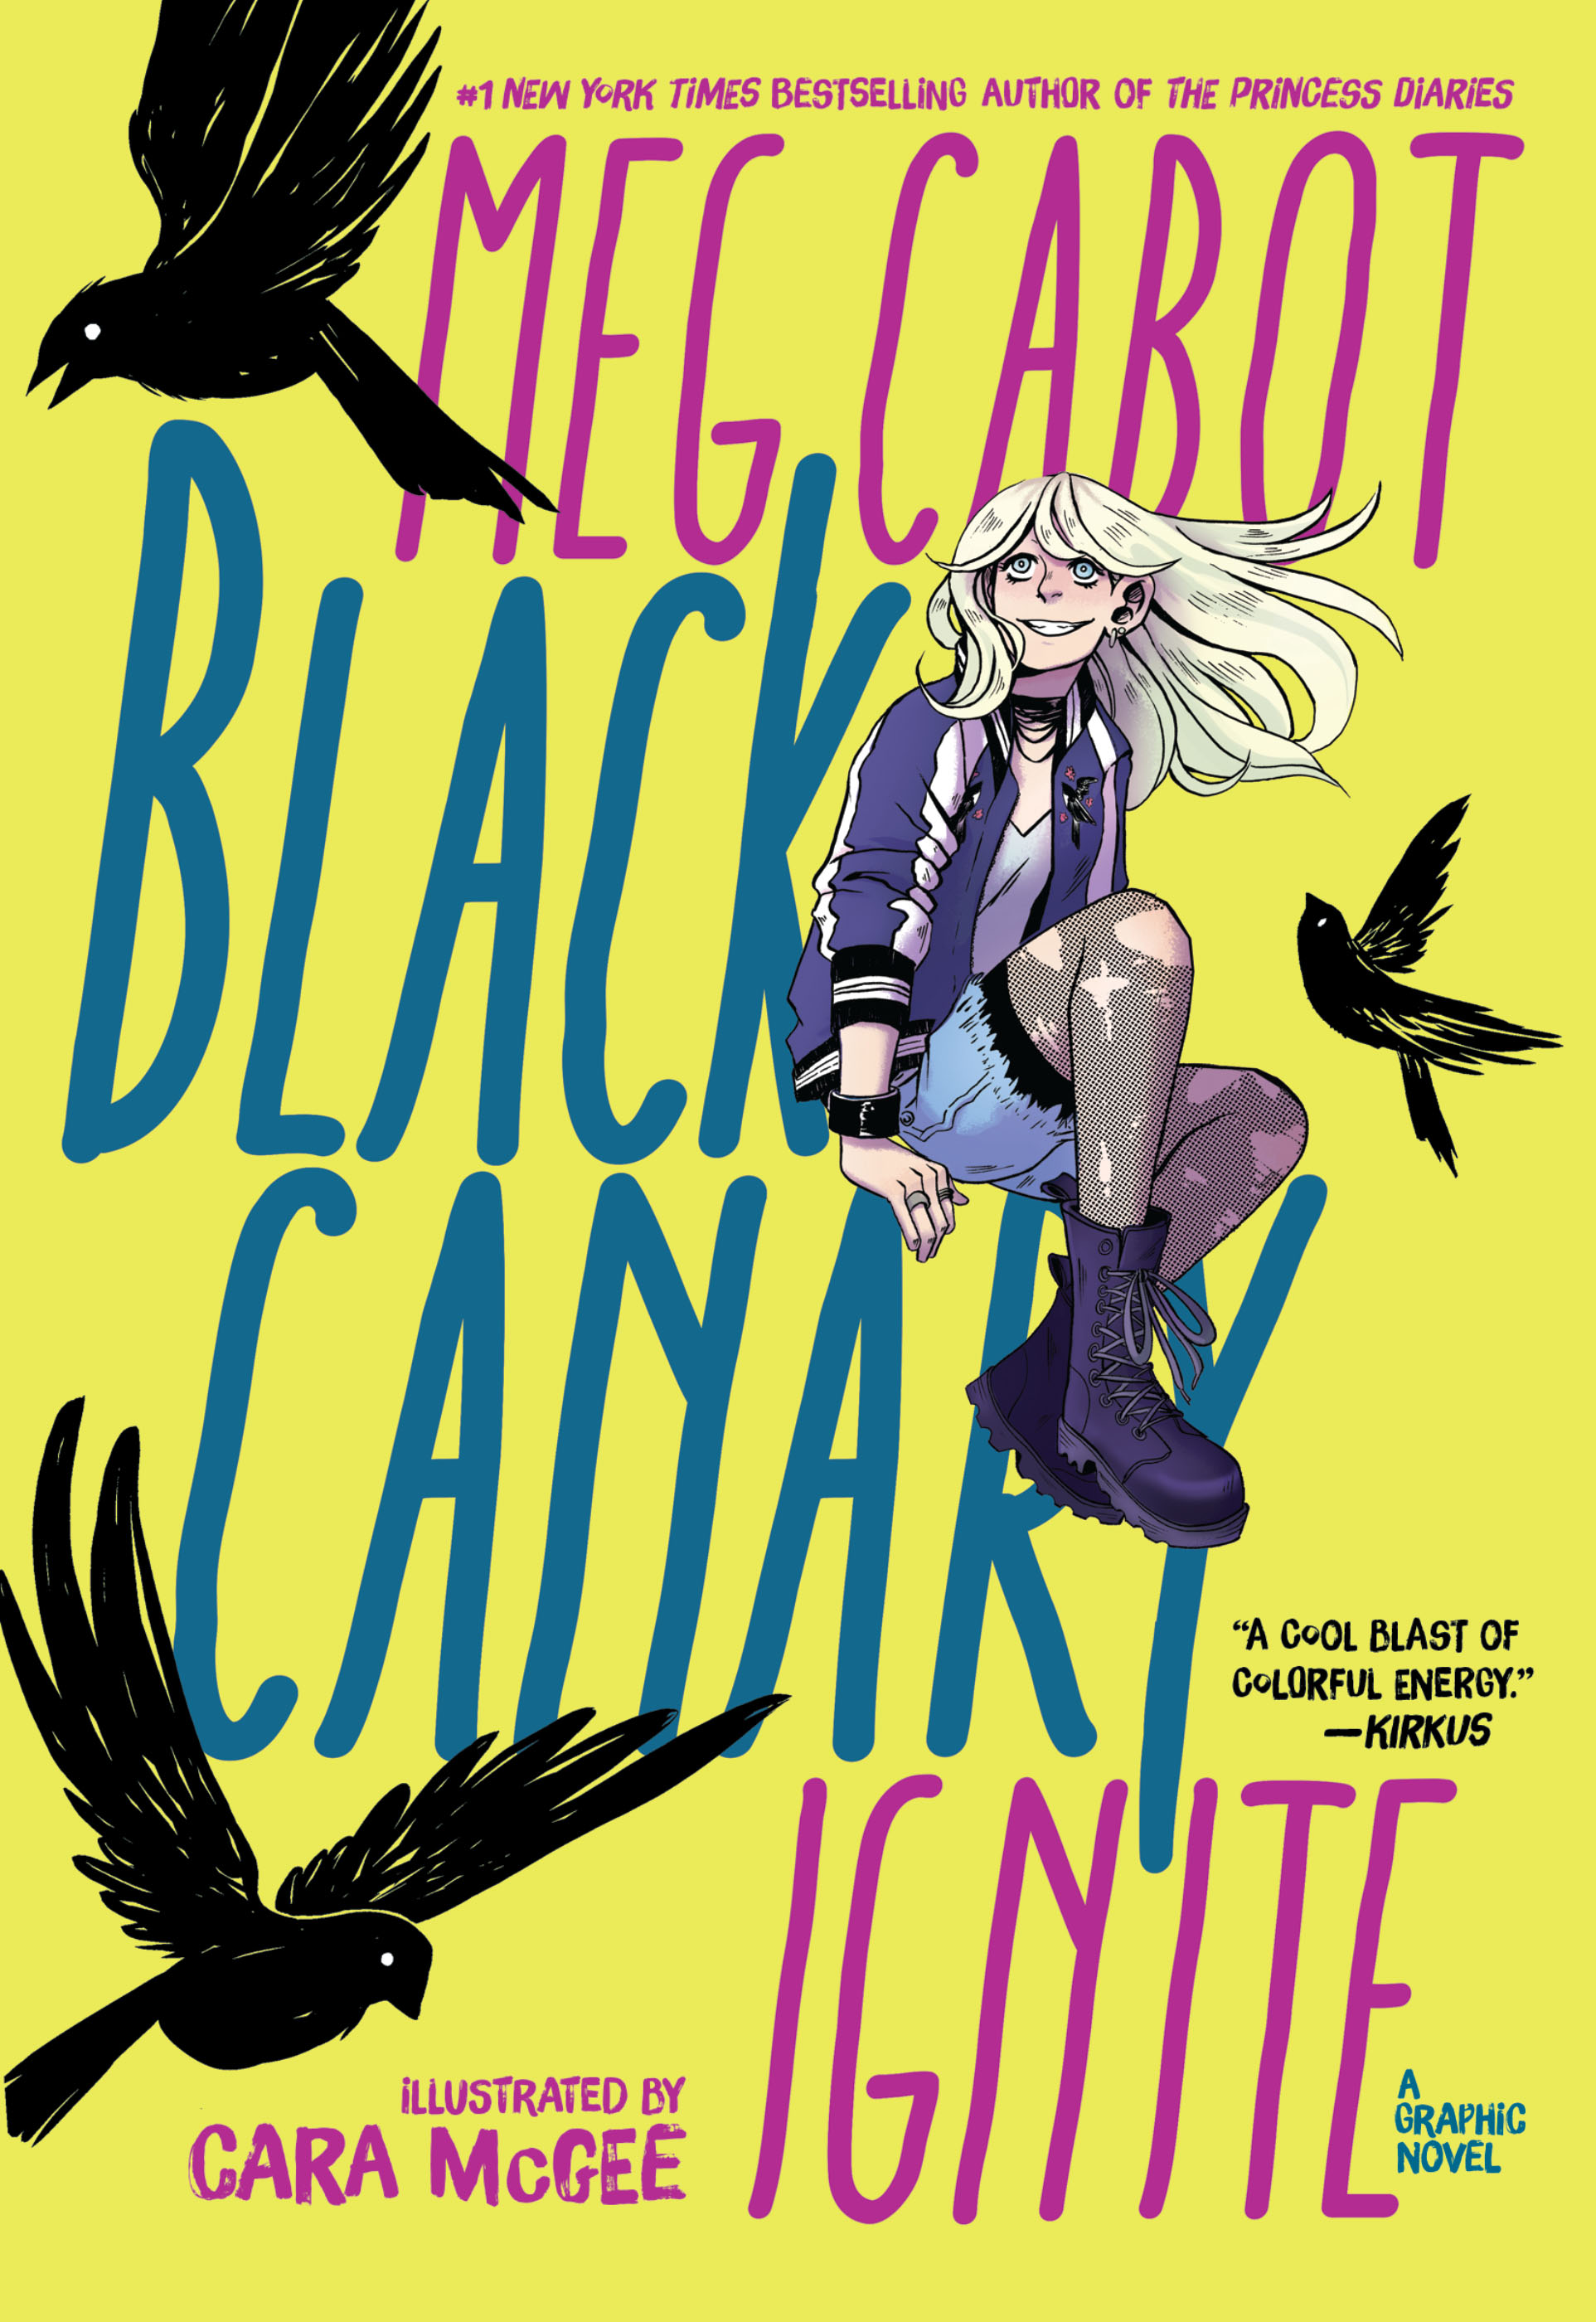 Read online Black Canary: Ignite comic -  Issue # TPB - 1